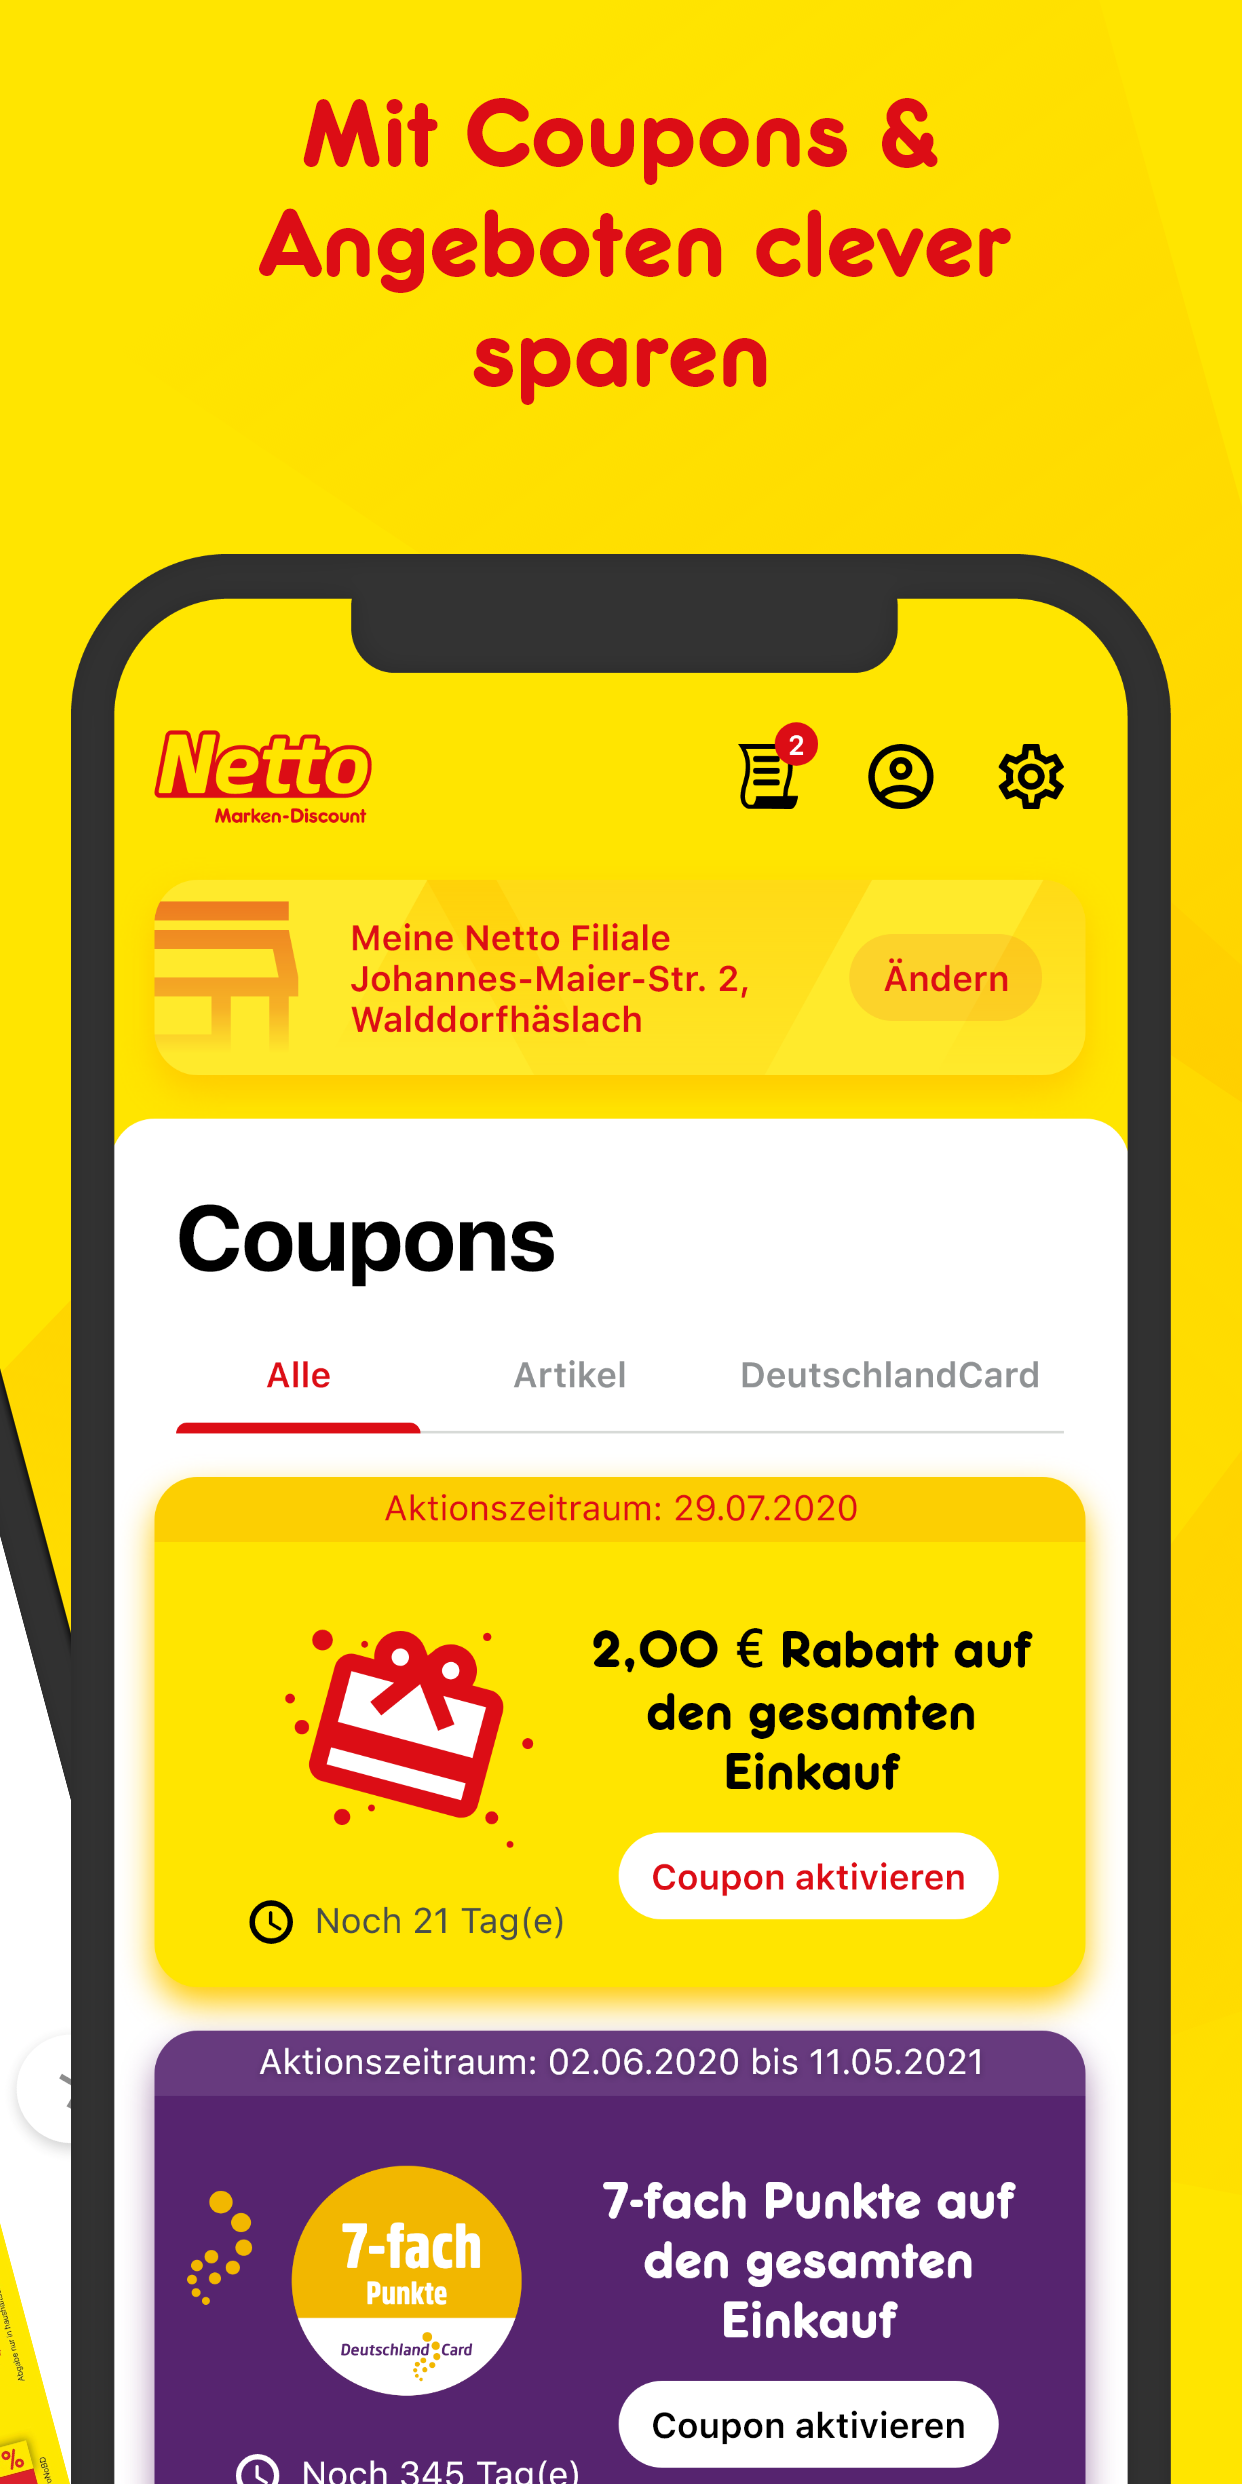 Android application Netto-App screenshort